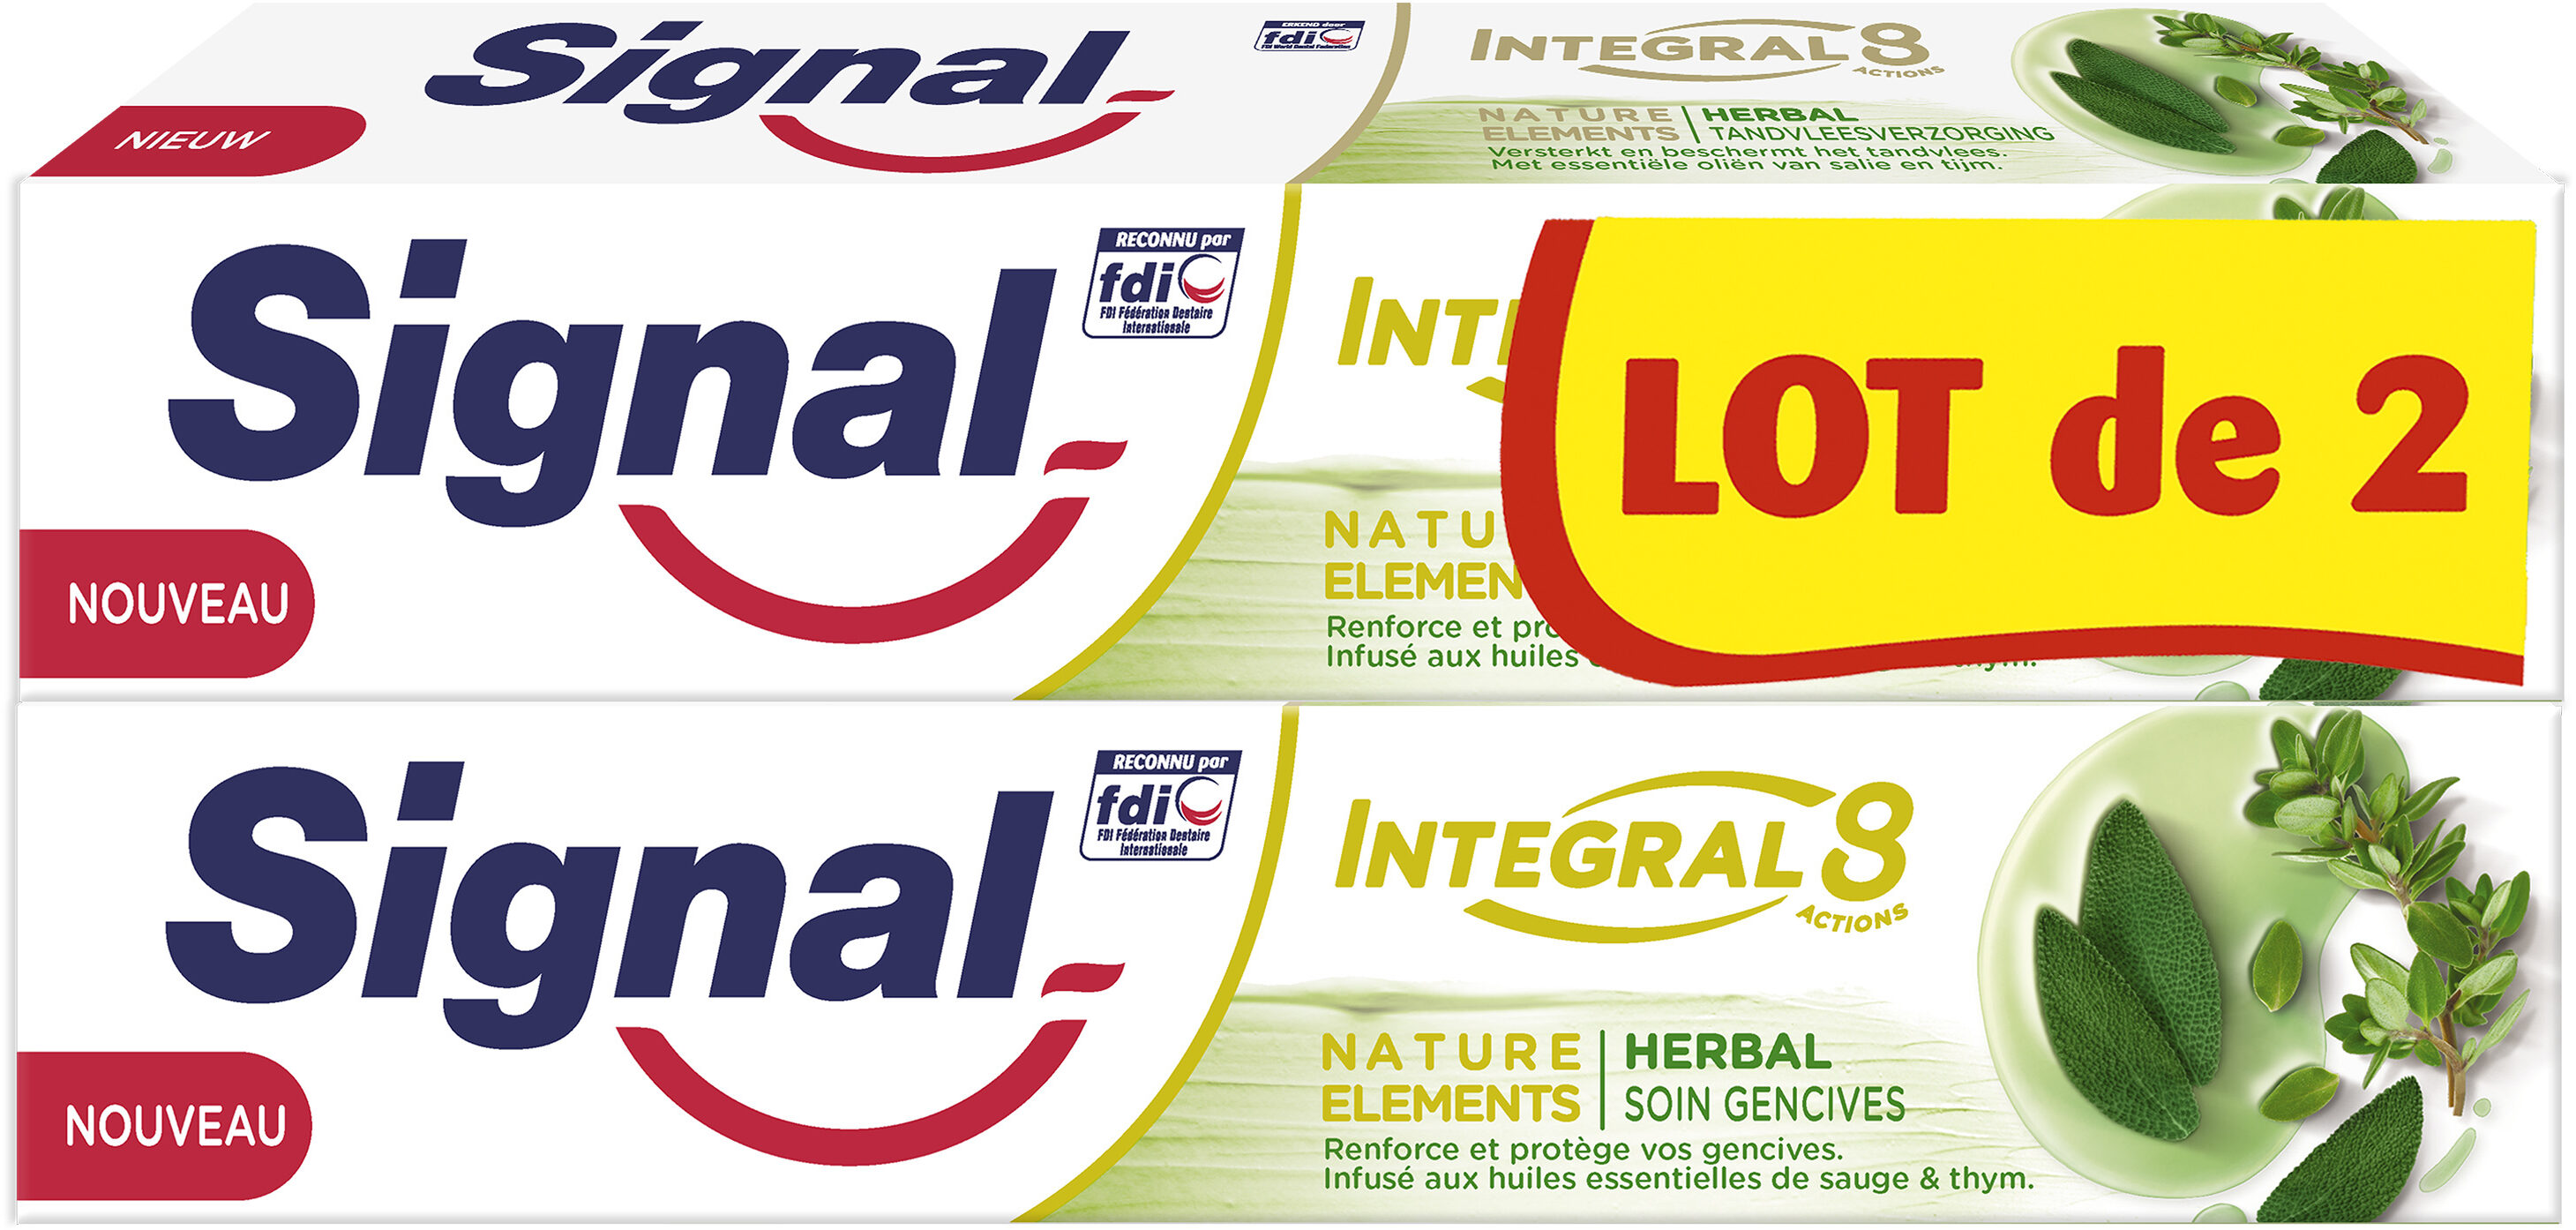 Signal Integral 8 Dentifrice Nature Elements Soin Gencives 2x75ml - Tuote - fr